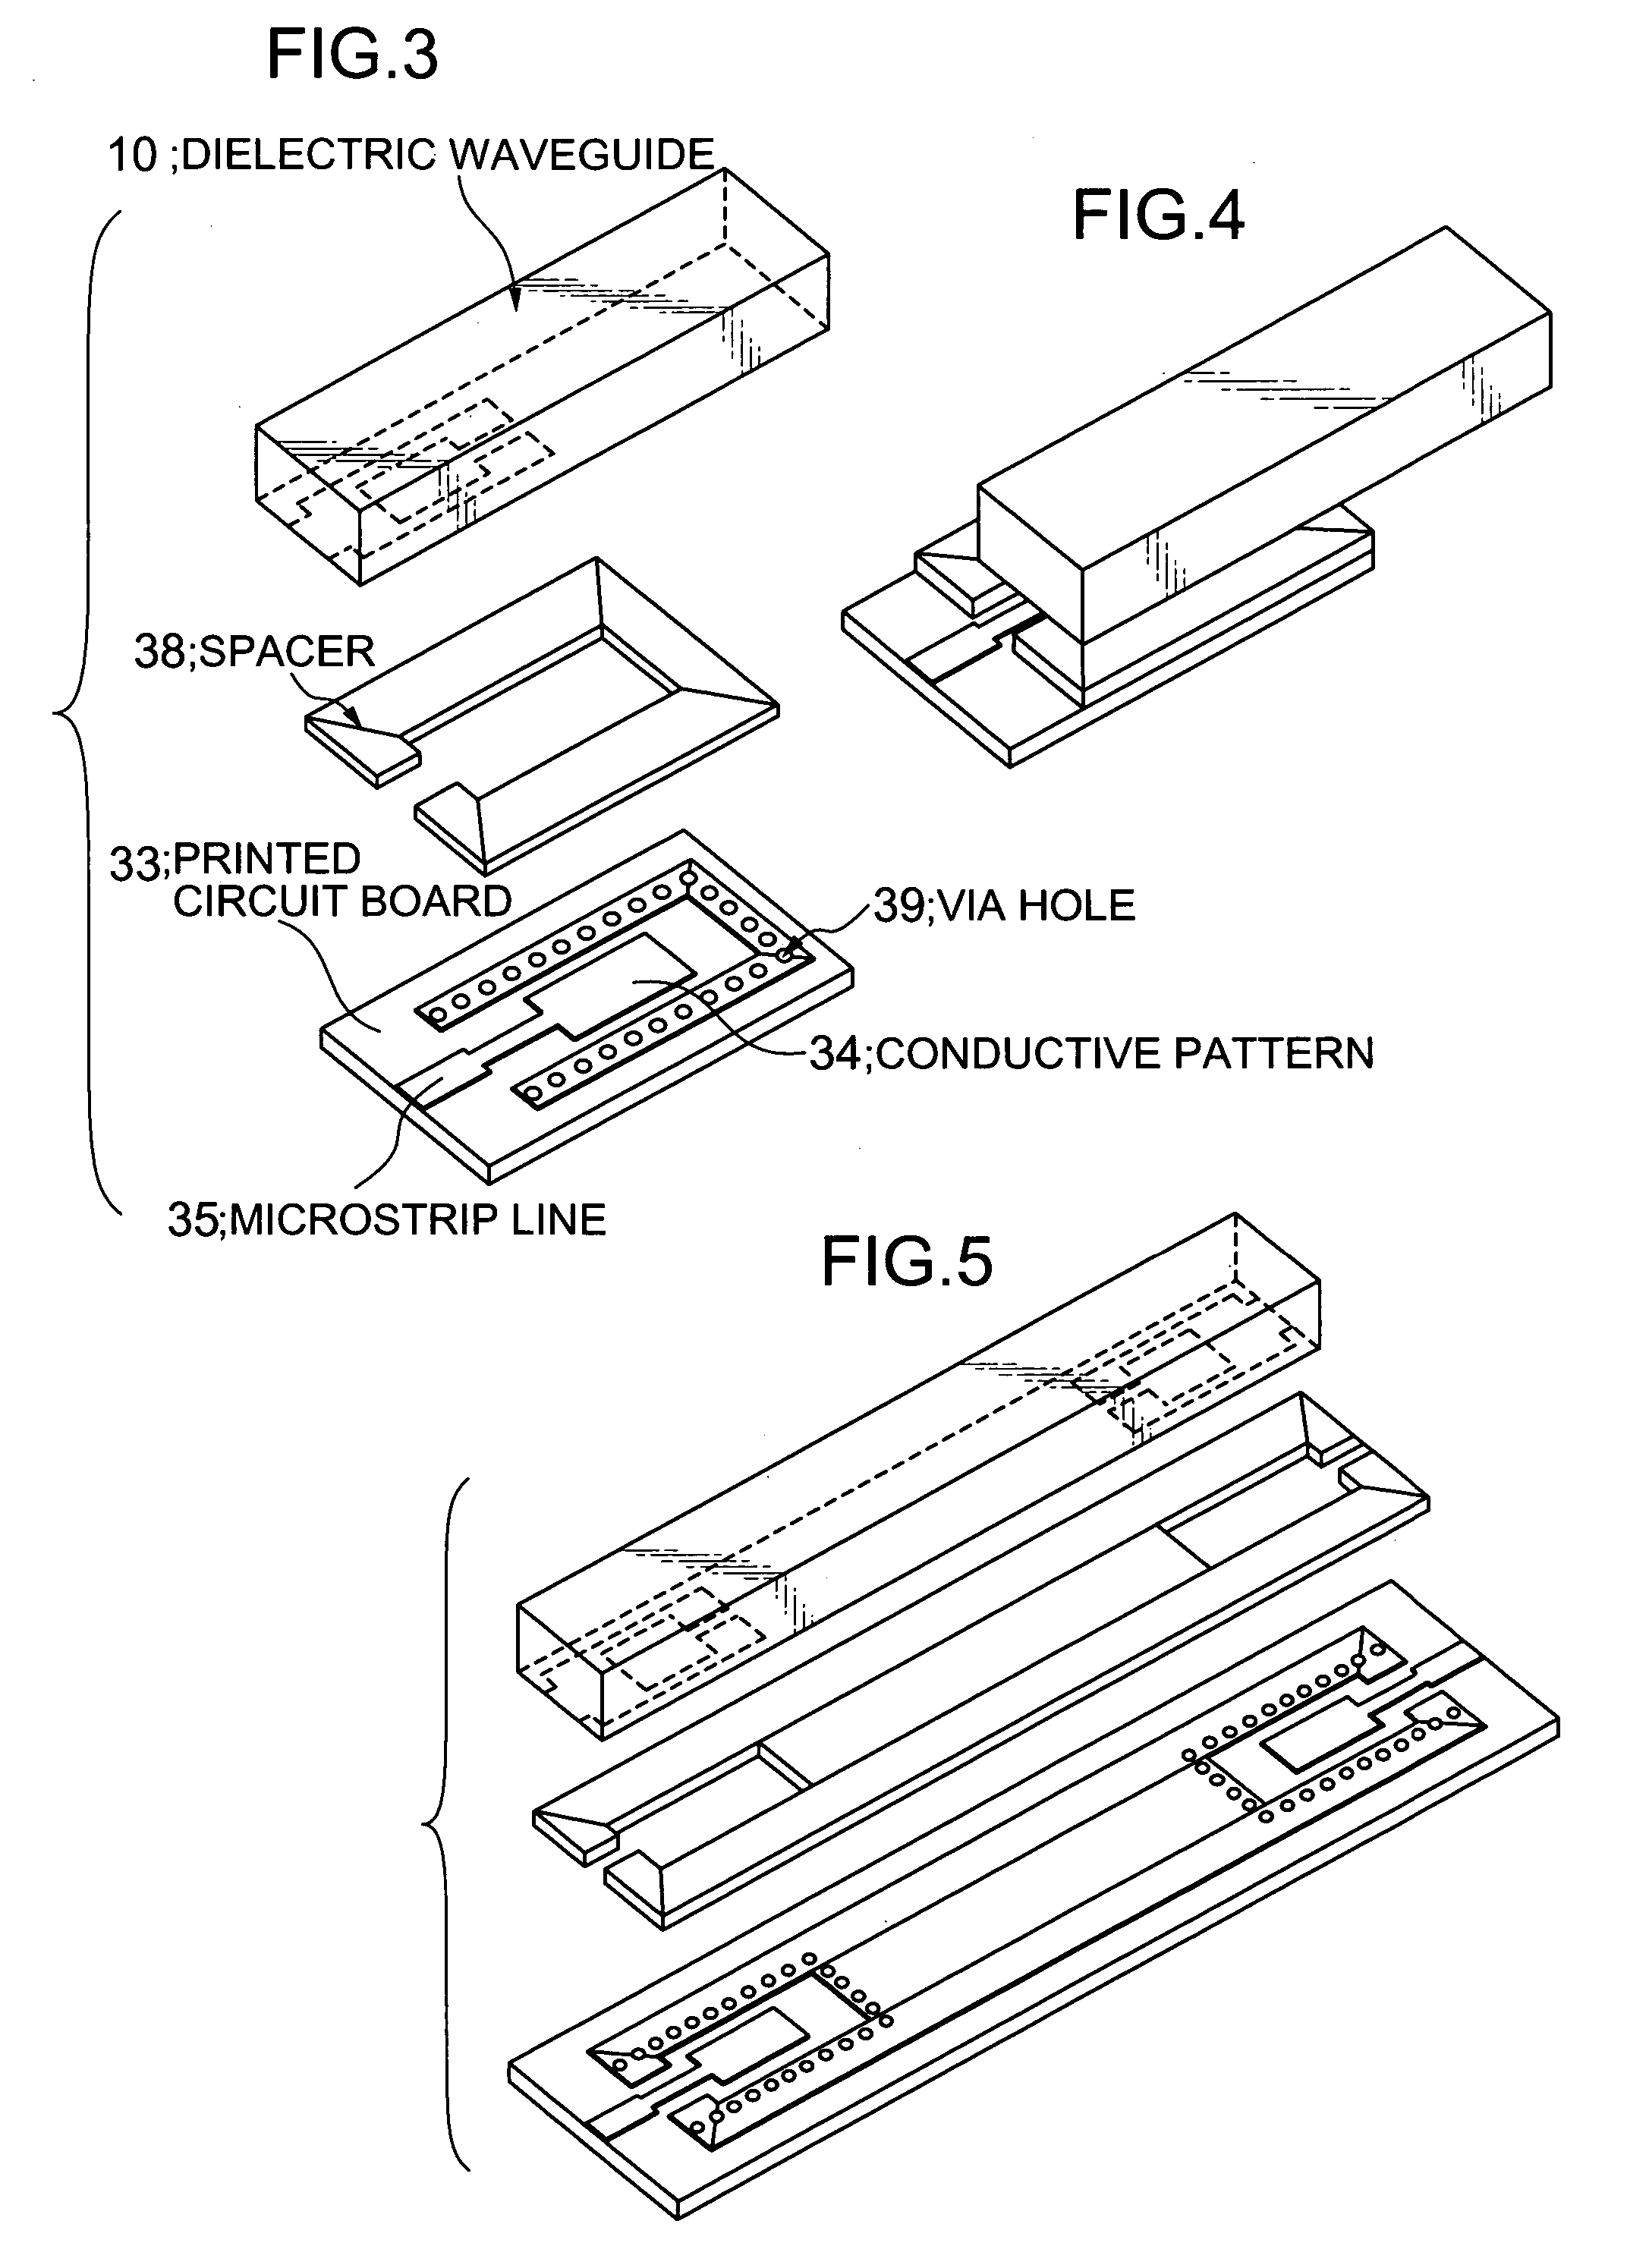 Input/output coupling structure for dielectric waveguide having conductive coupling patterns separated by a spacer